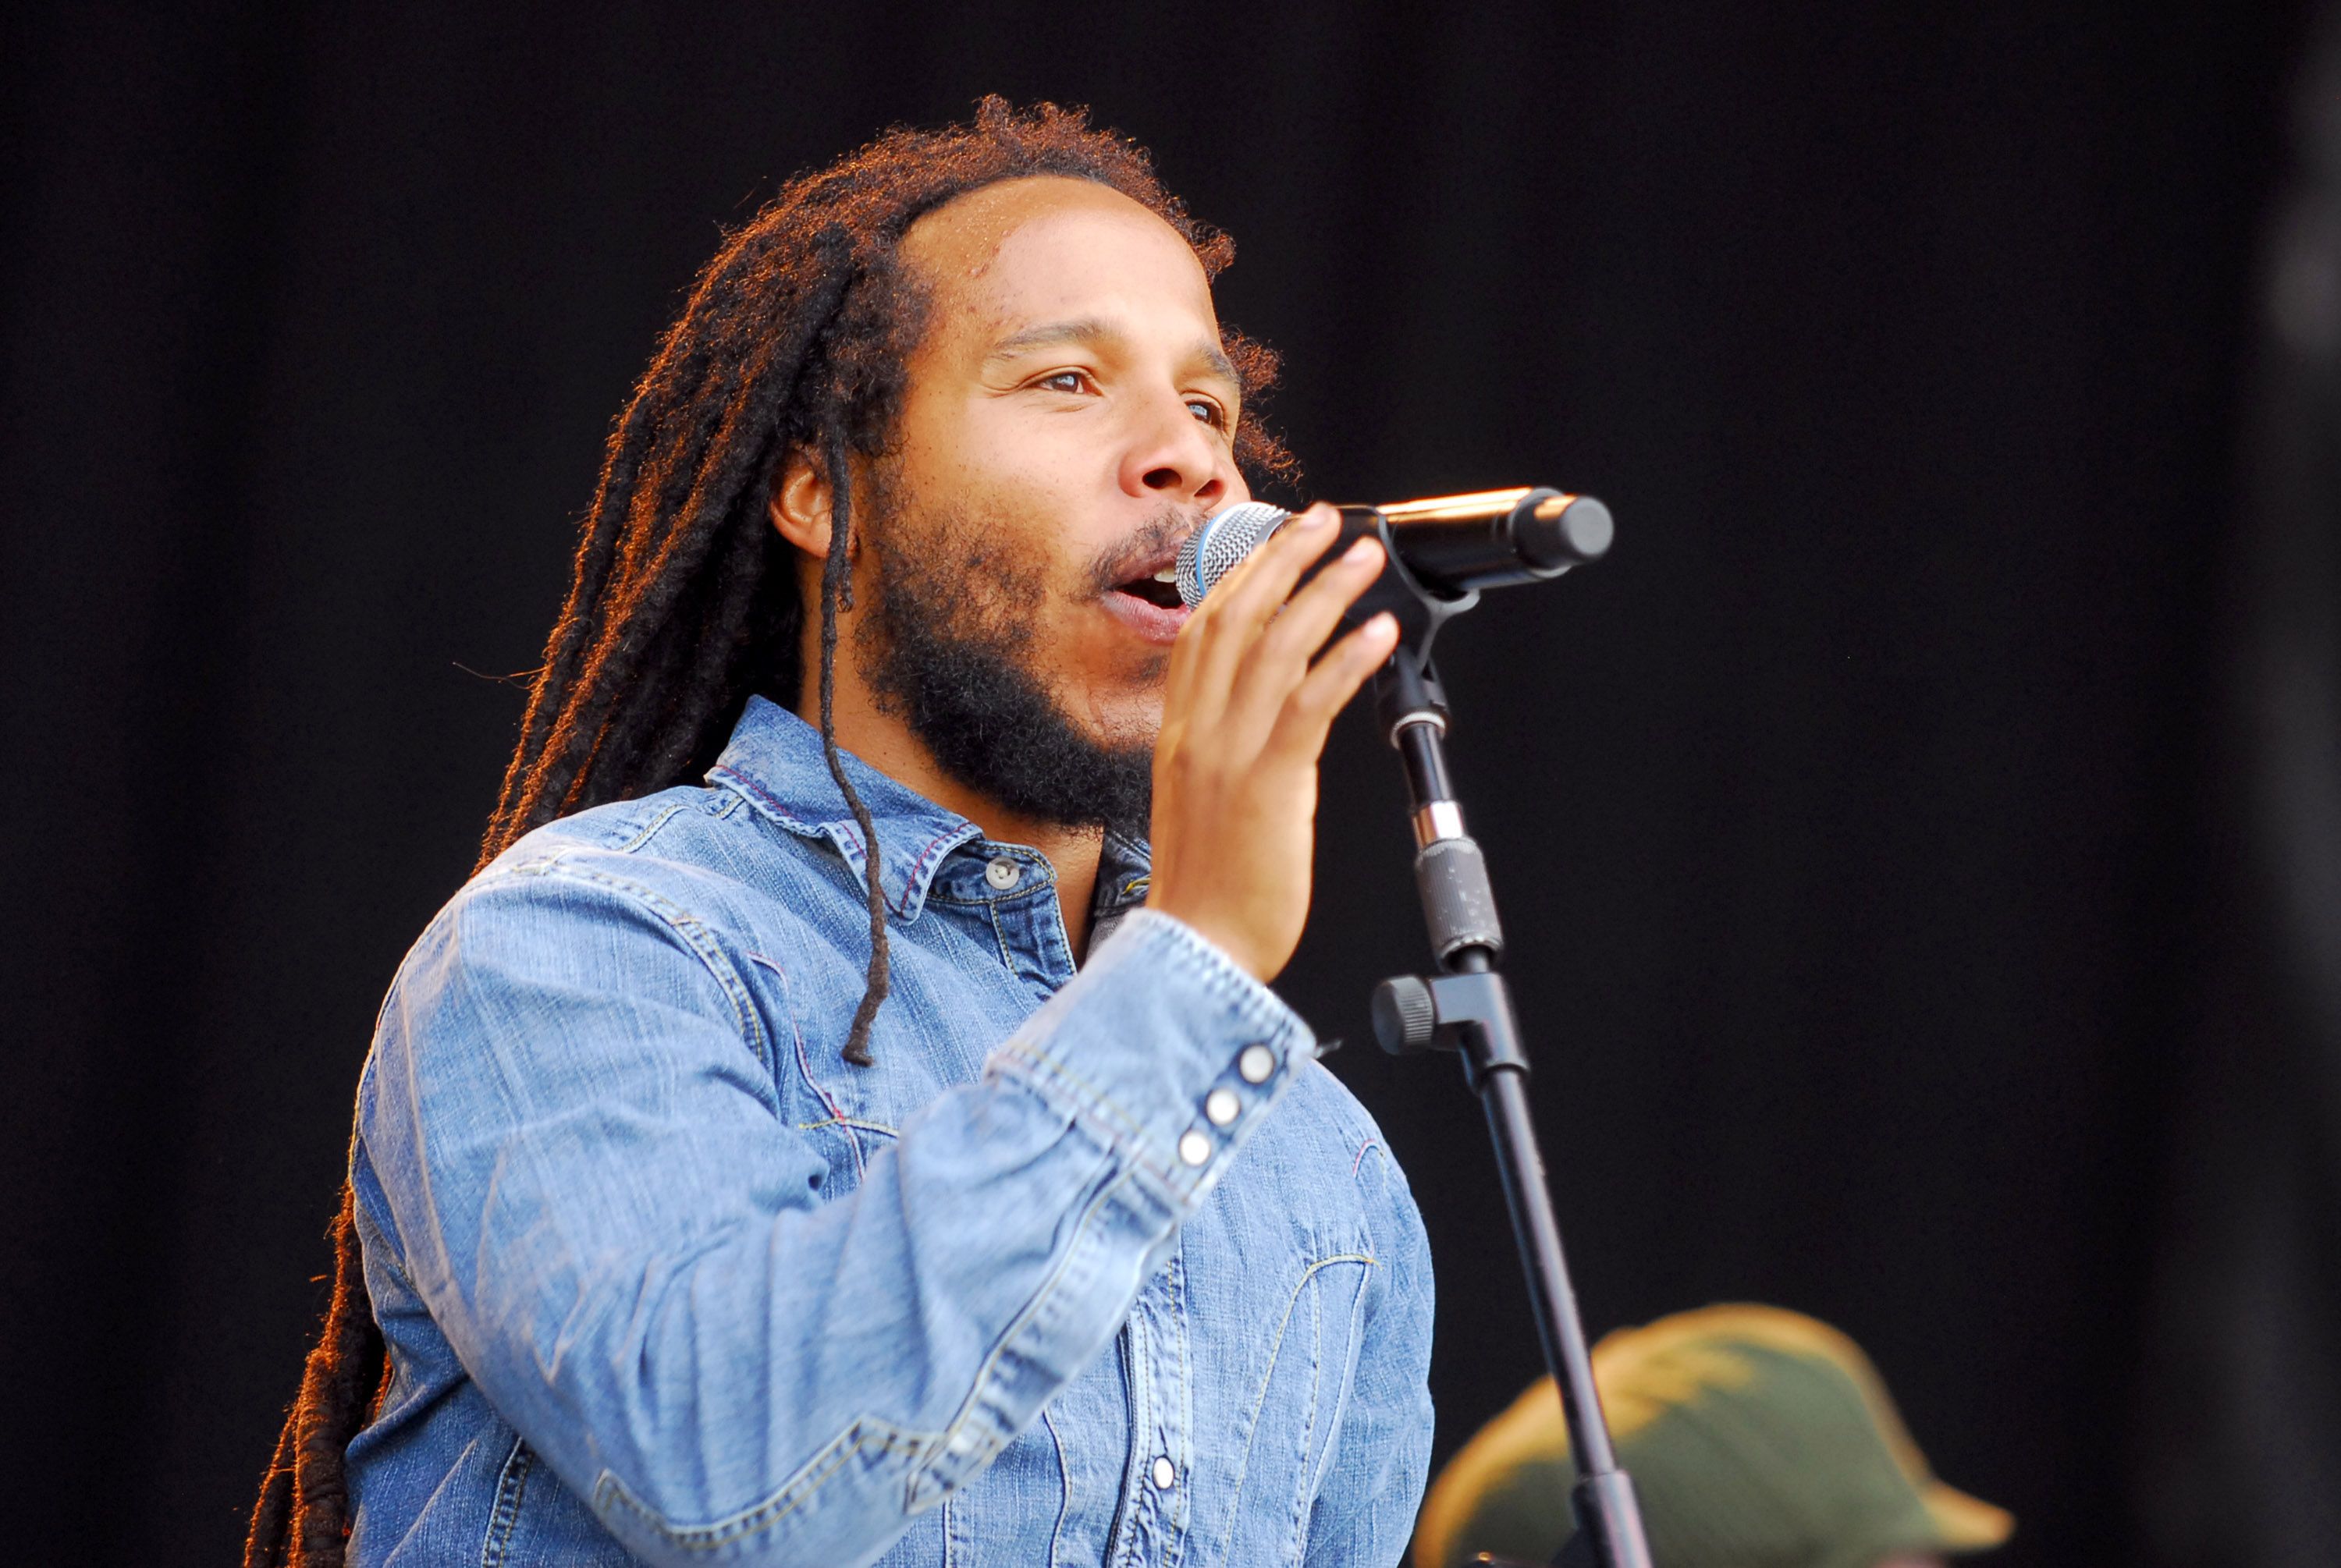 Ziggy Marley sings in Manchester, Tennessee, at the Bonnaroo Music and Arts Festival in 2007. | Source: Getty Images